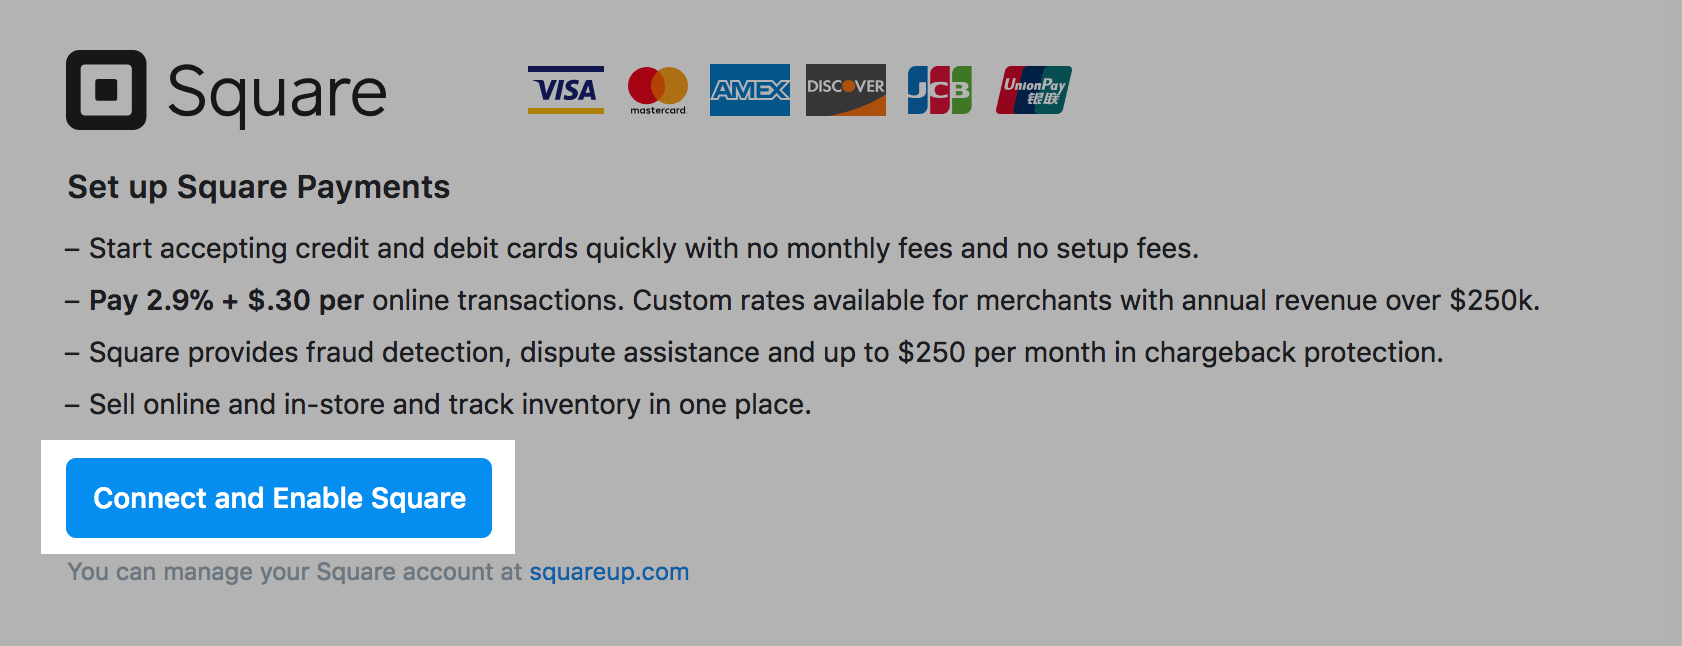 Square_Payment_Gateway.png